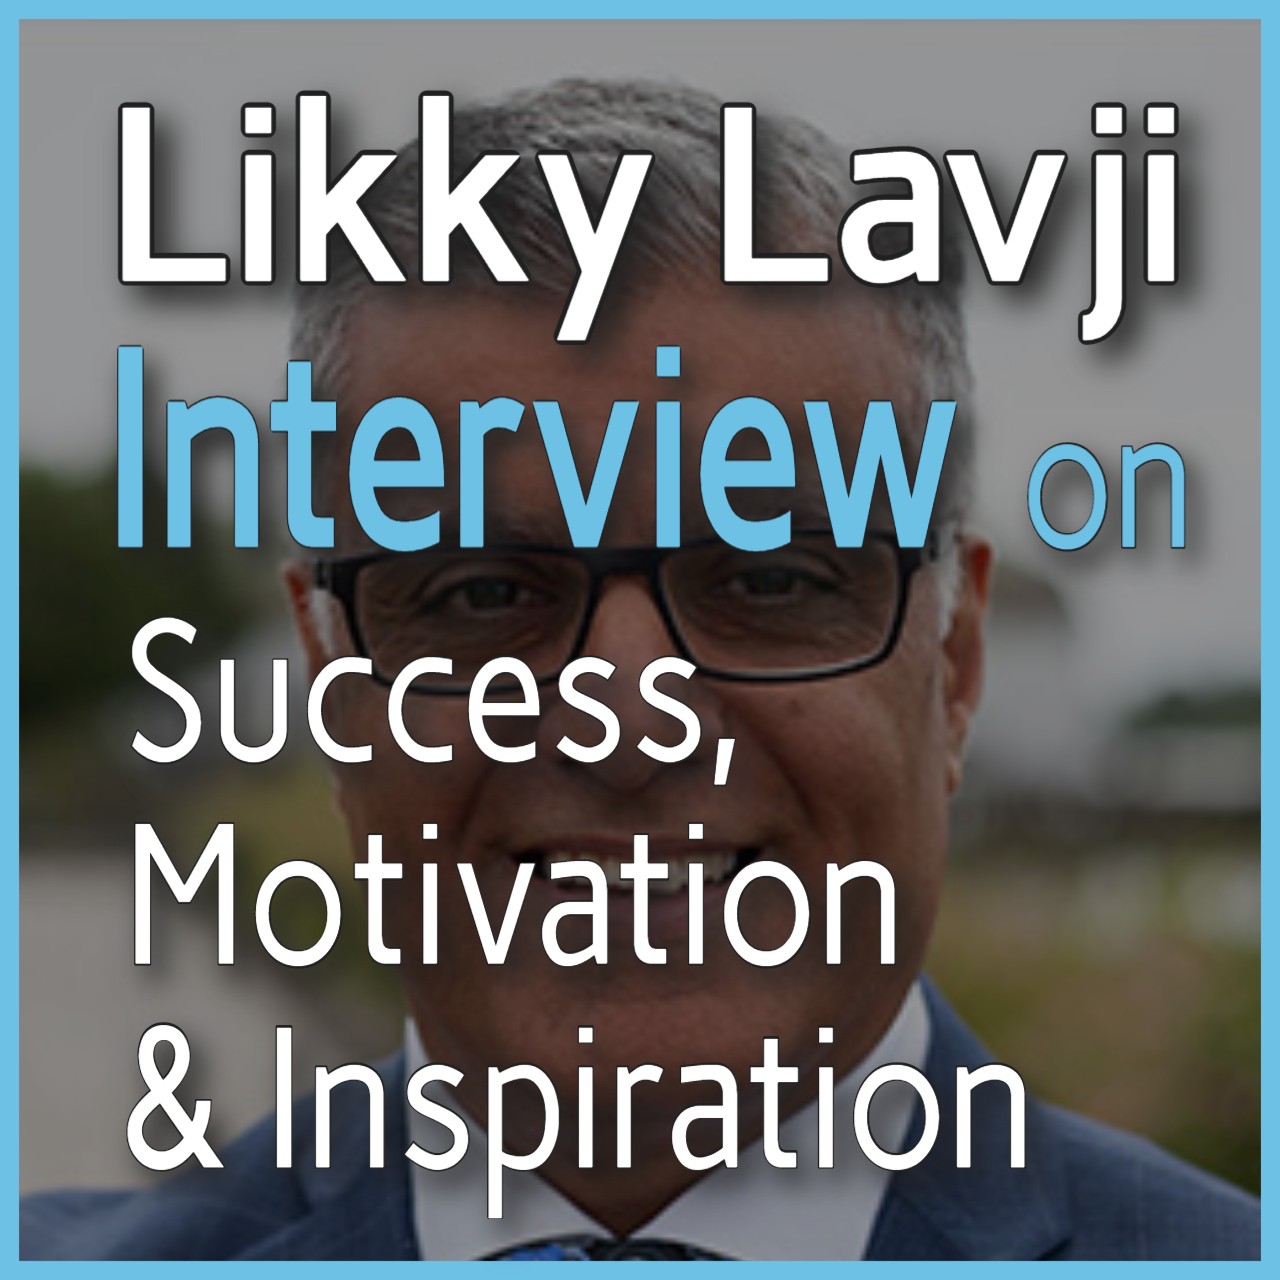 Read more about the article Likky Lavji on the Success, Motivation & Inspiration podcast